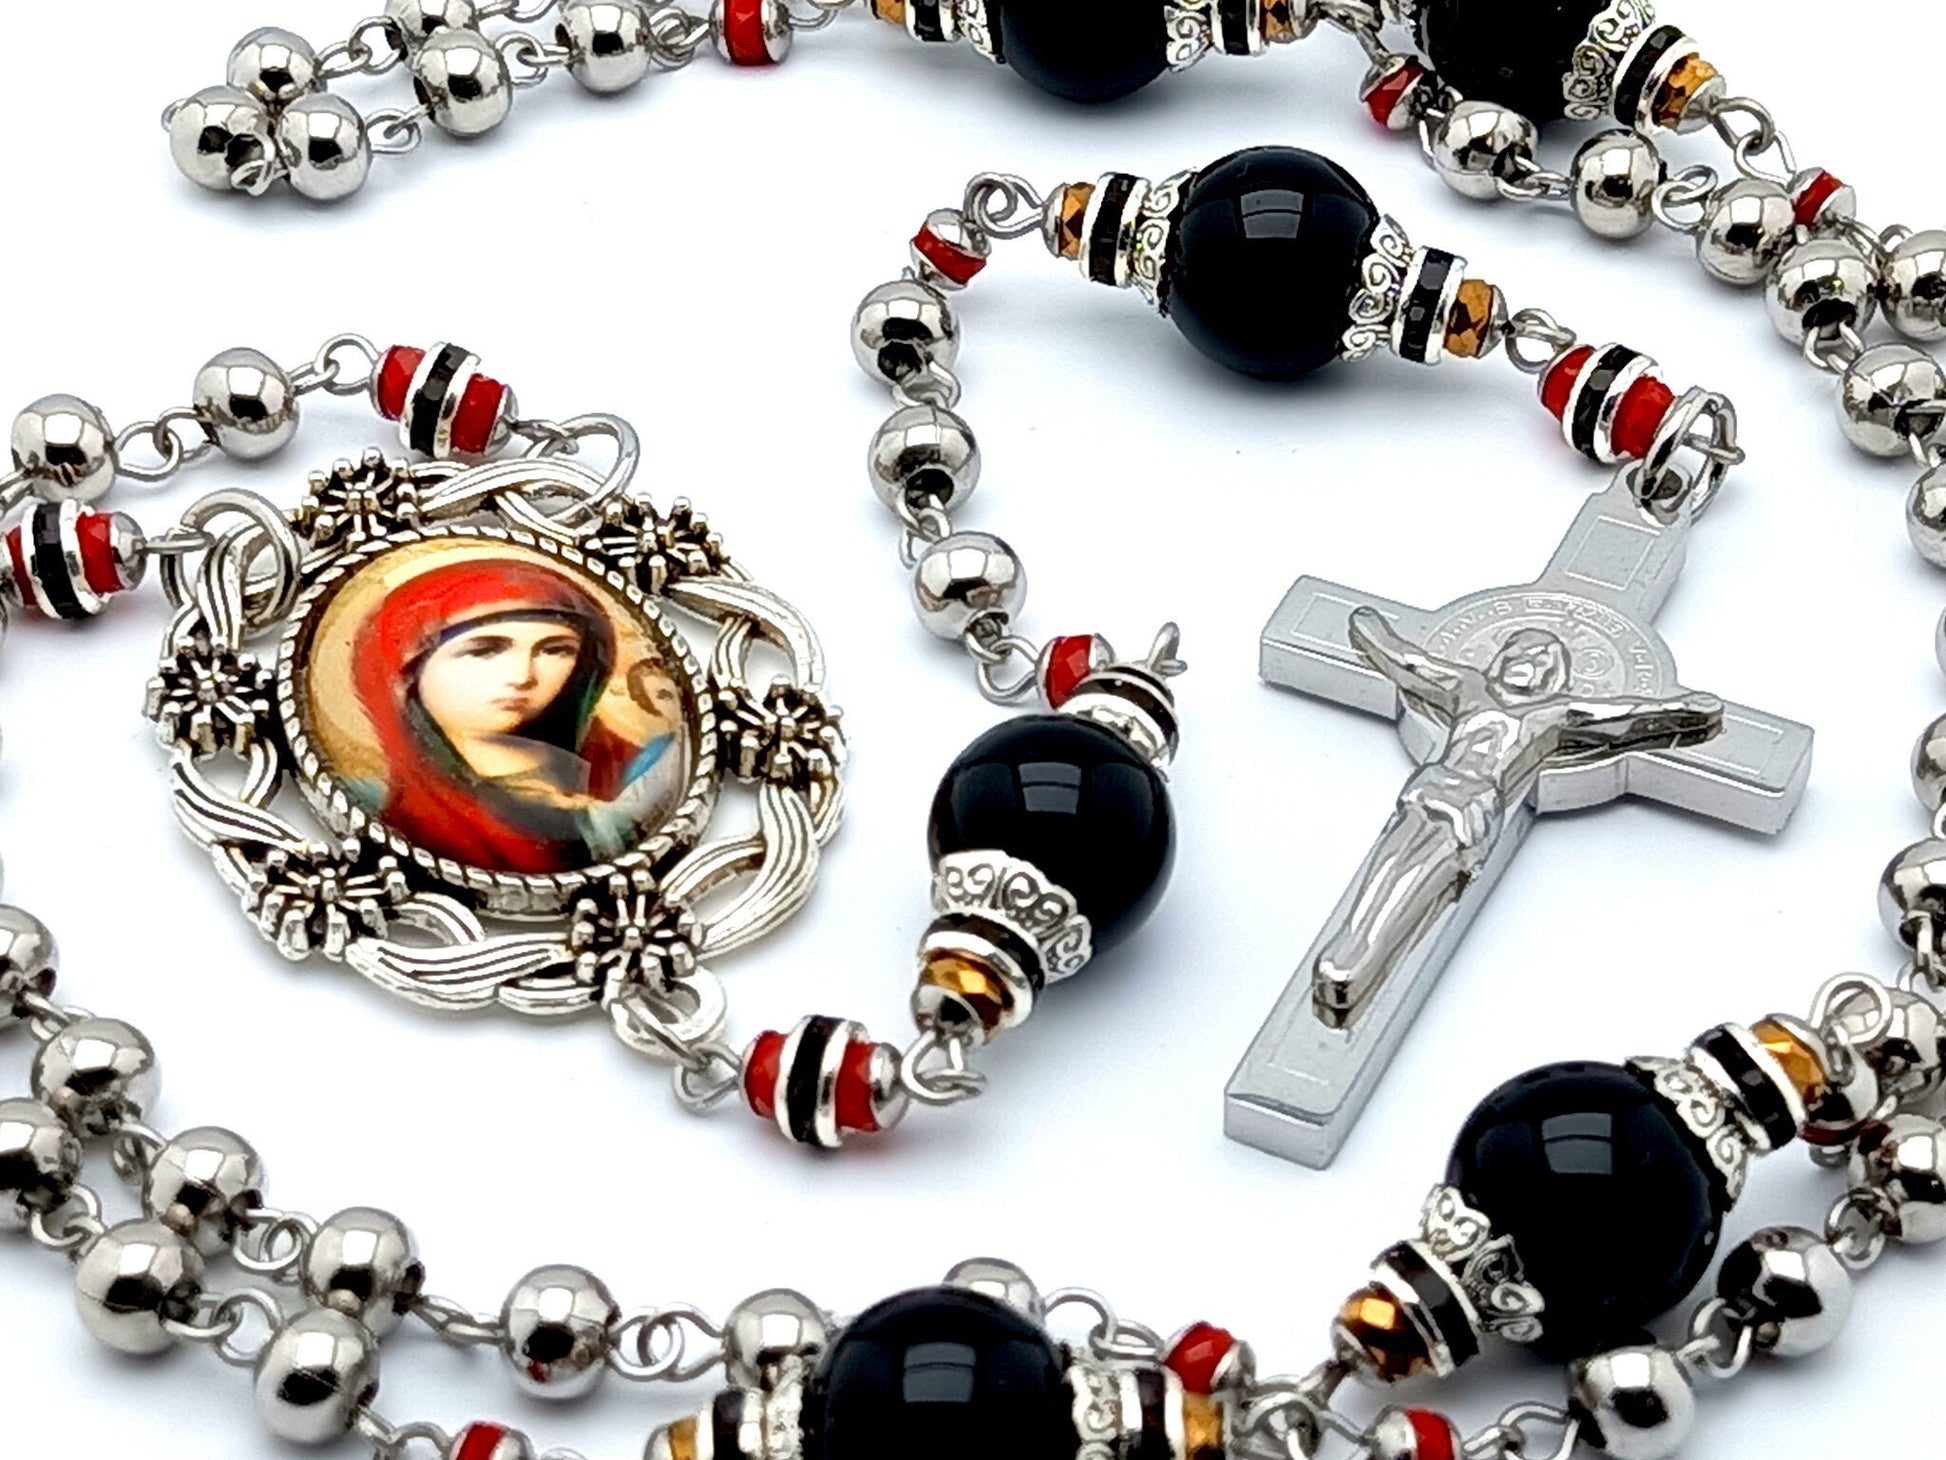 Our Lady of Perpetual Help unique rosary beads with stainless steel and onyx beads, Saint Benedict stainless steel crucifix and picture centre medal.